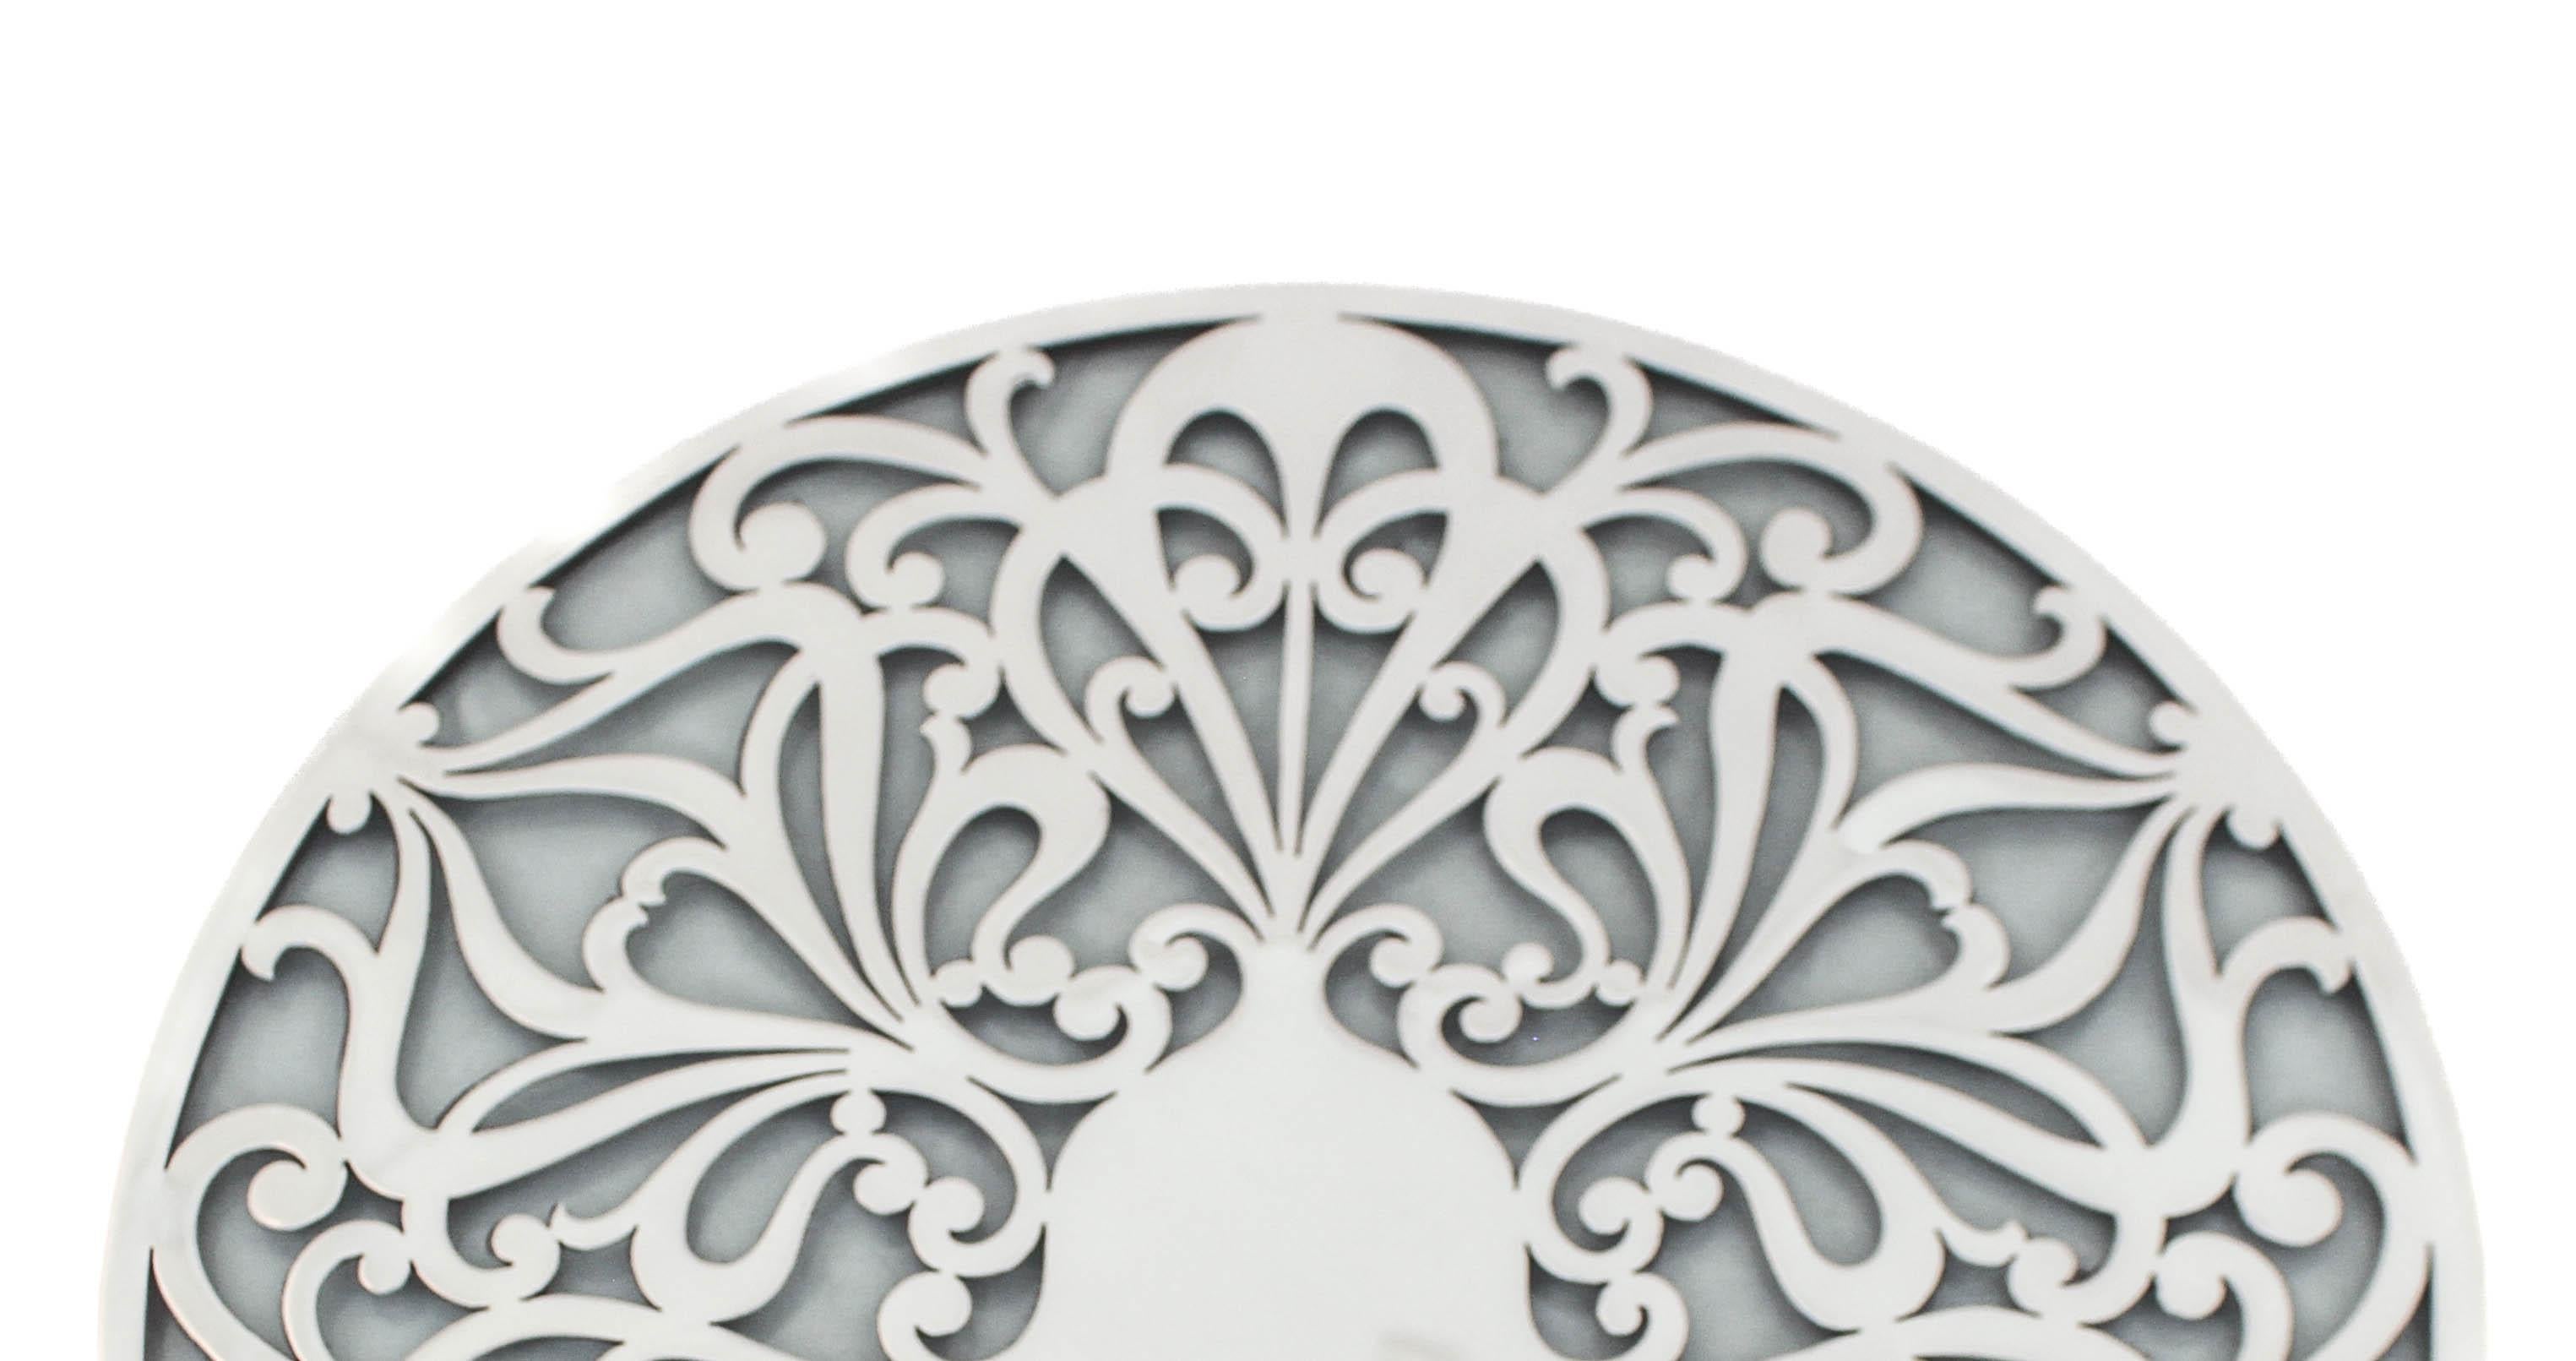 Being offered is an exceptionally large sterling silver trivet by the world renowned Tiffany & Company.  Designed in the Art Nouveau style it has a natural almost fluid-like design.  Using nature as inspiration it has an organic aesthetic and feel. 